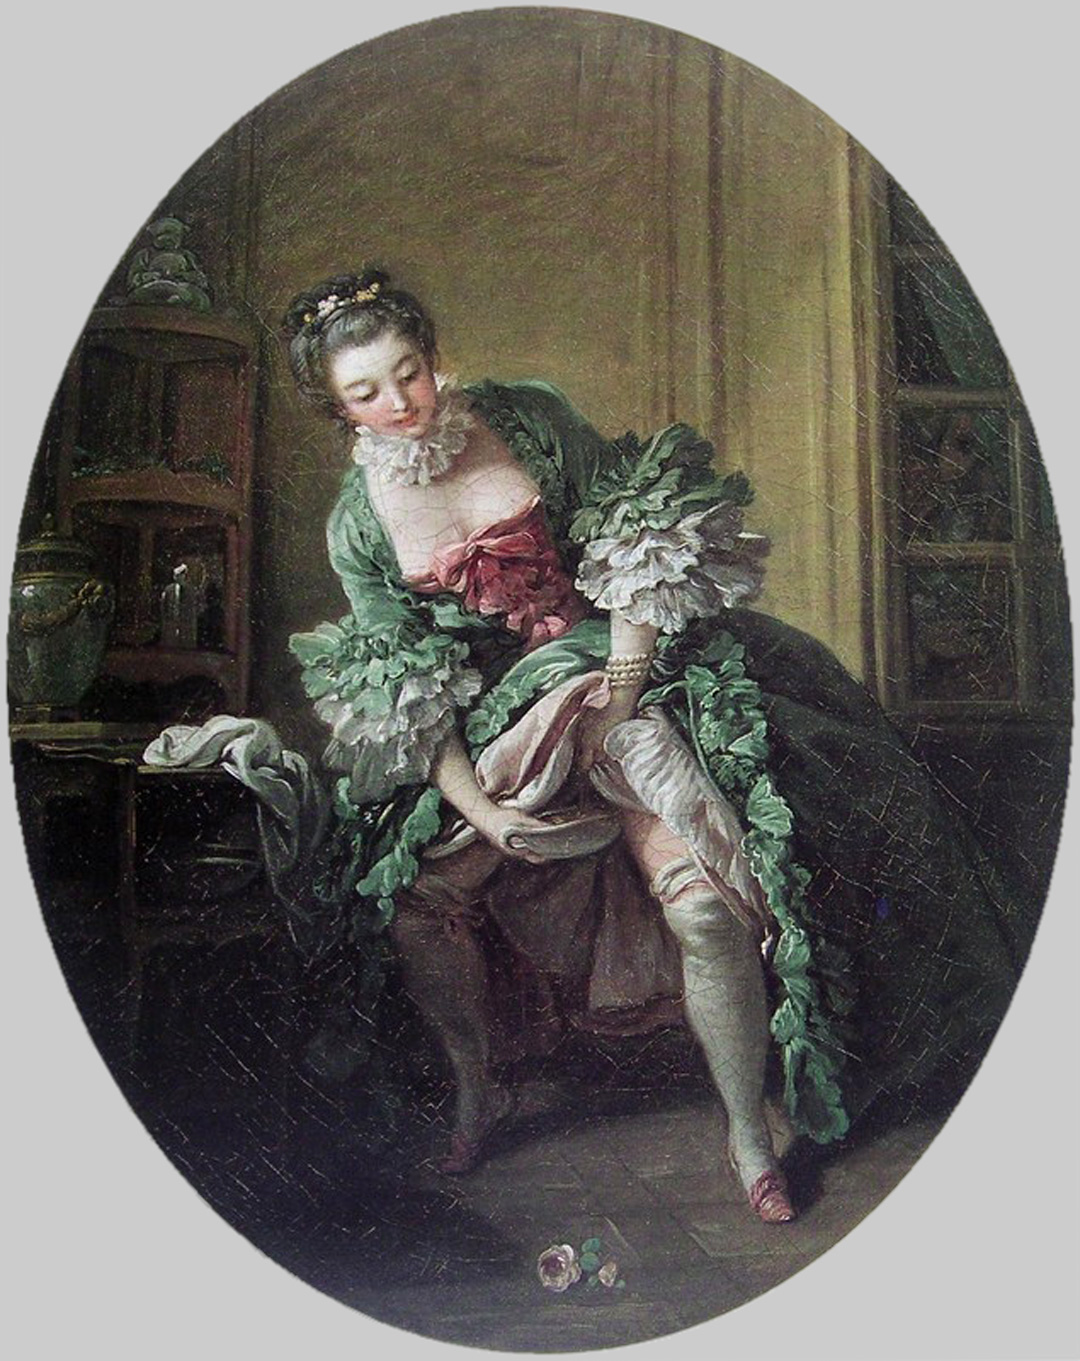 How did 18th century society women go to the toilet?